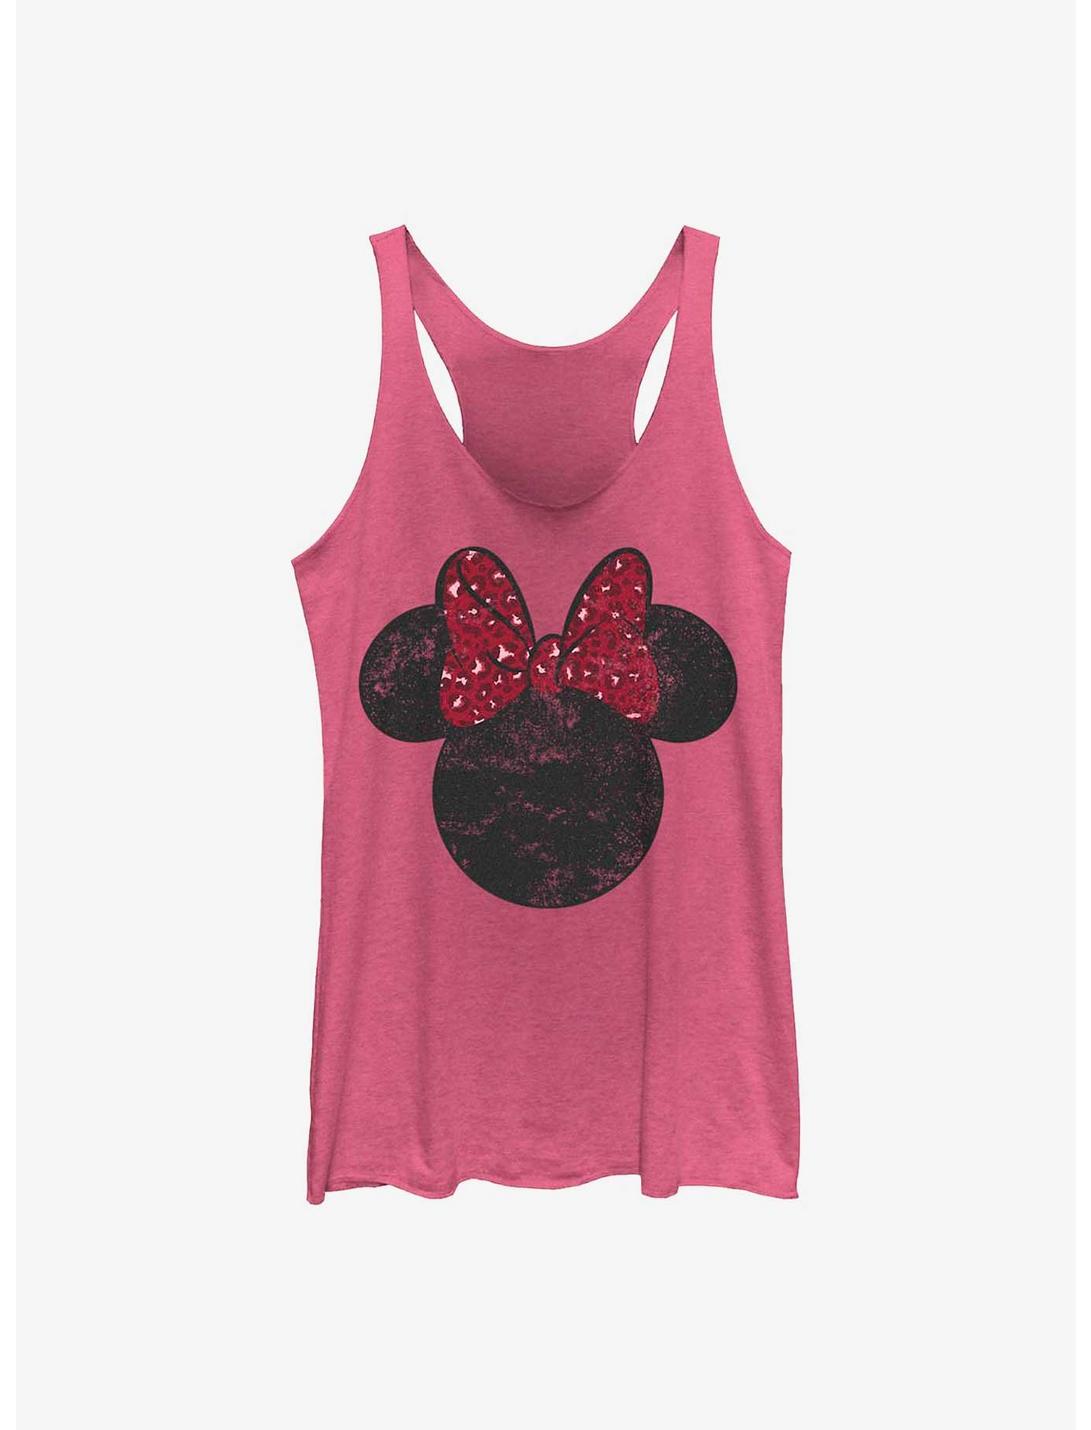 Disney Minnie Mouse Leopard Bow Ears Womens Tank Top - PINK